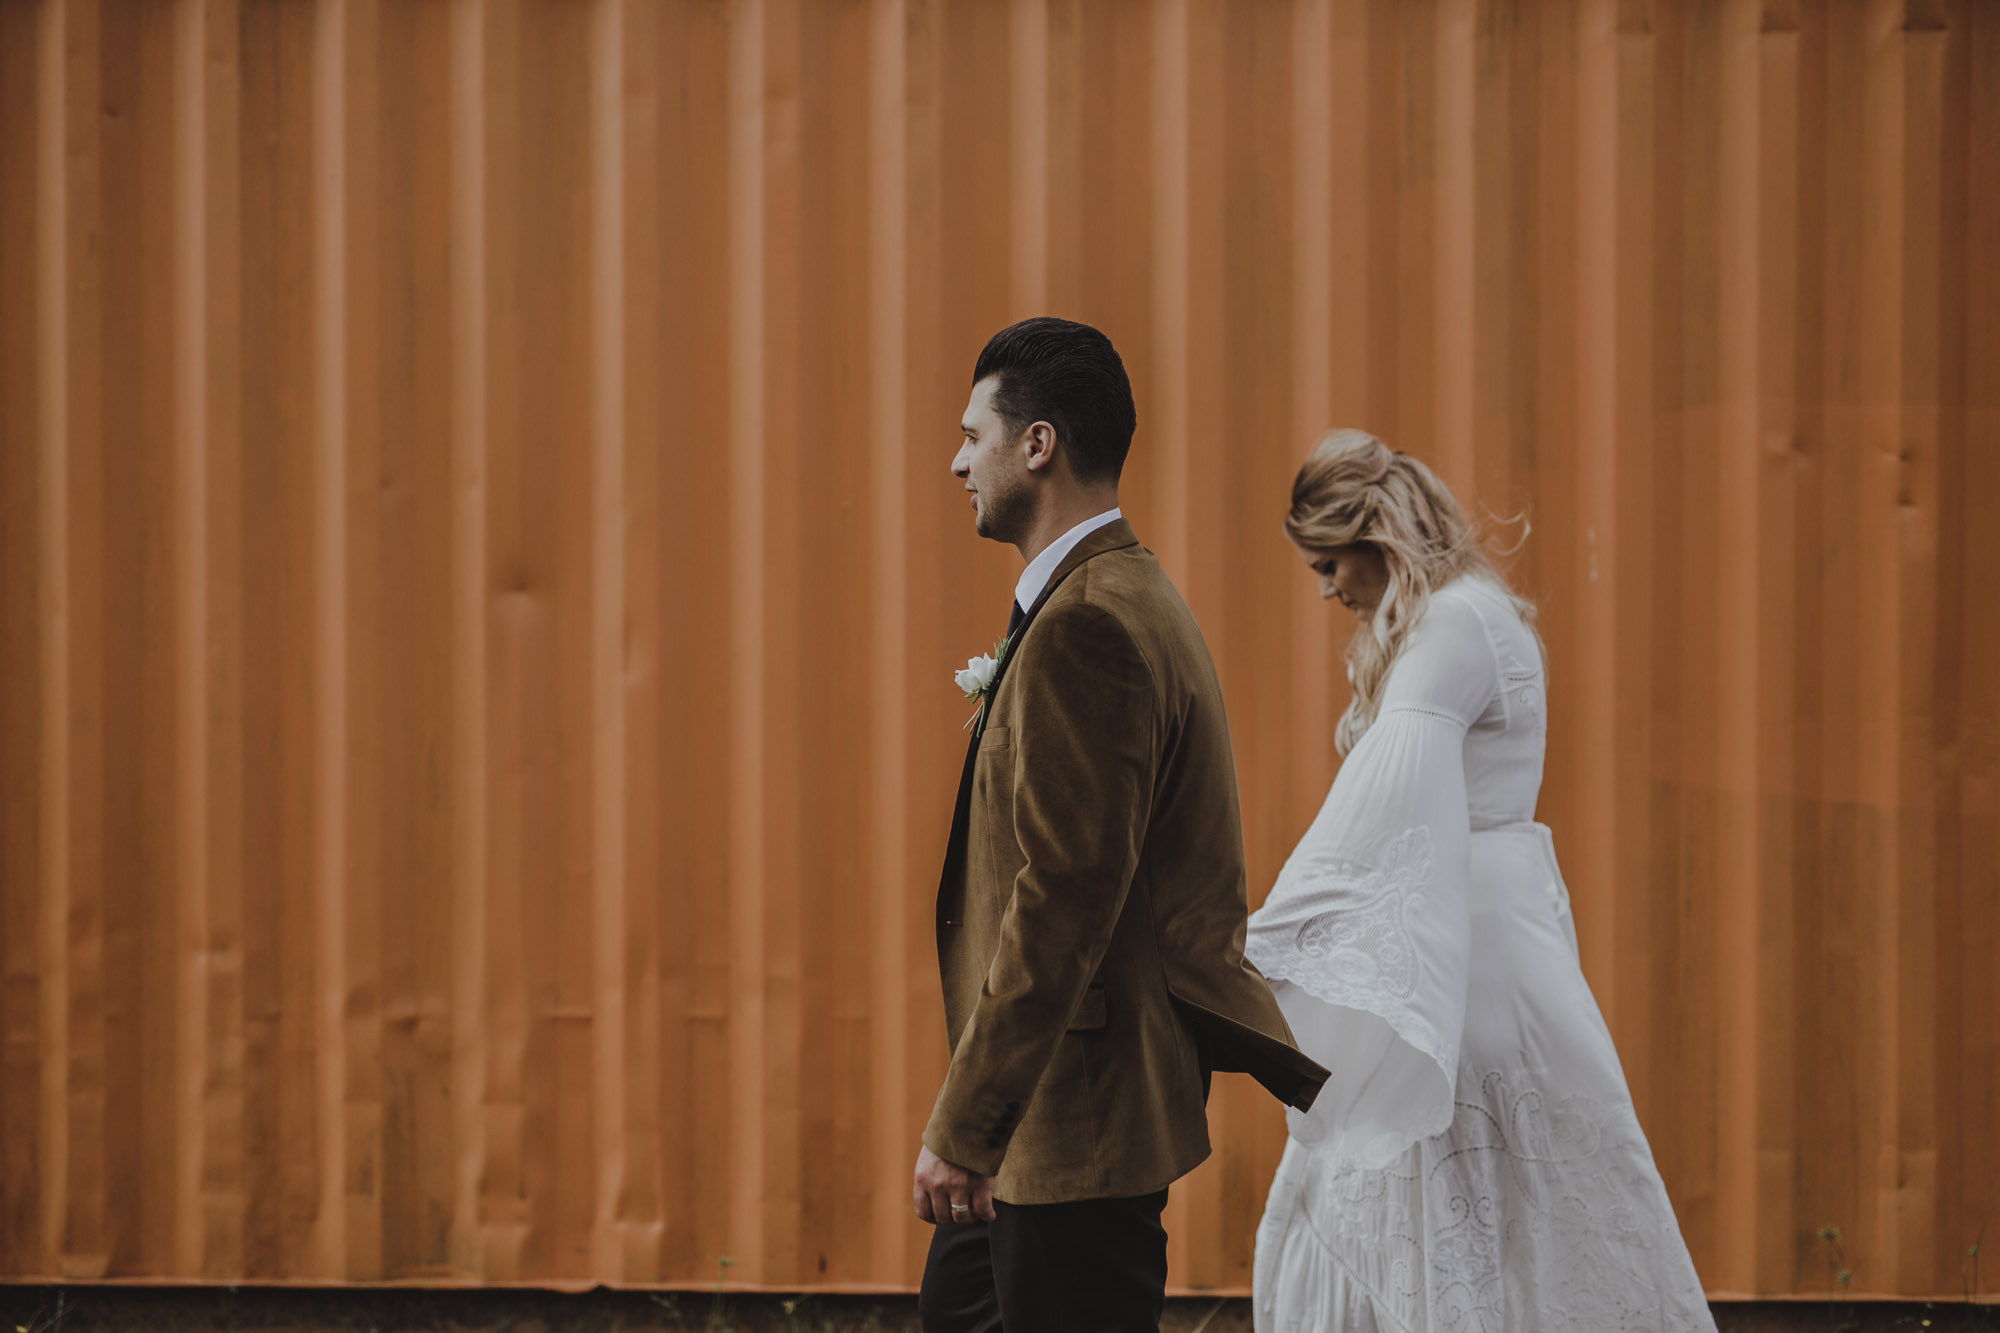 35 A low key New Zealand Estate wedding with a bohemian vintage vibe